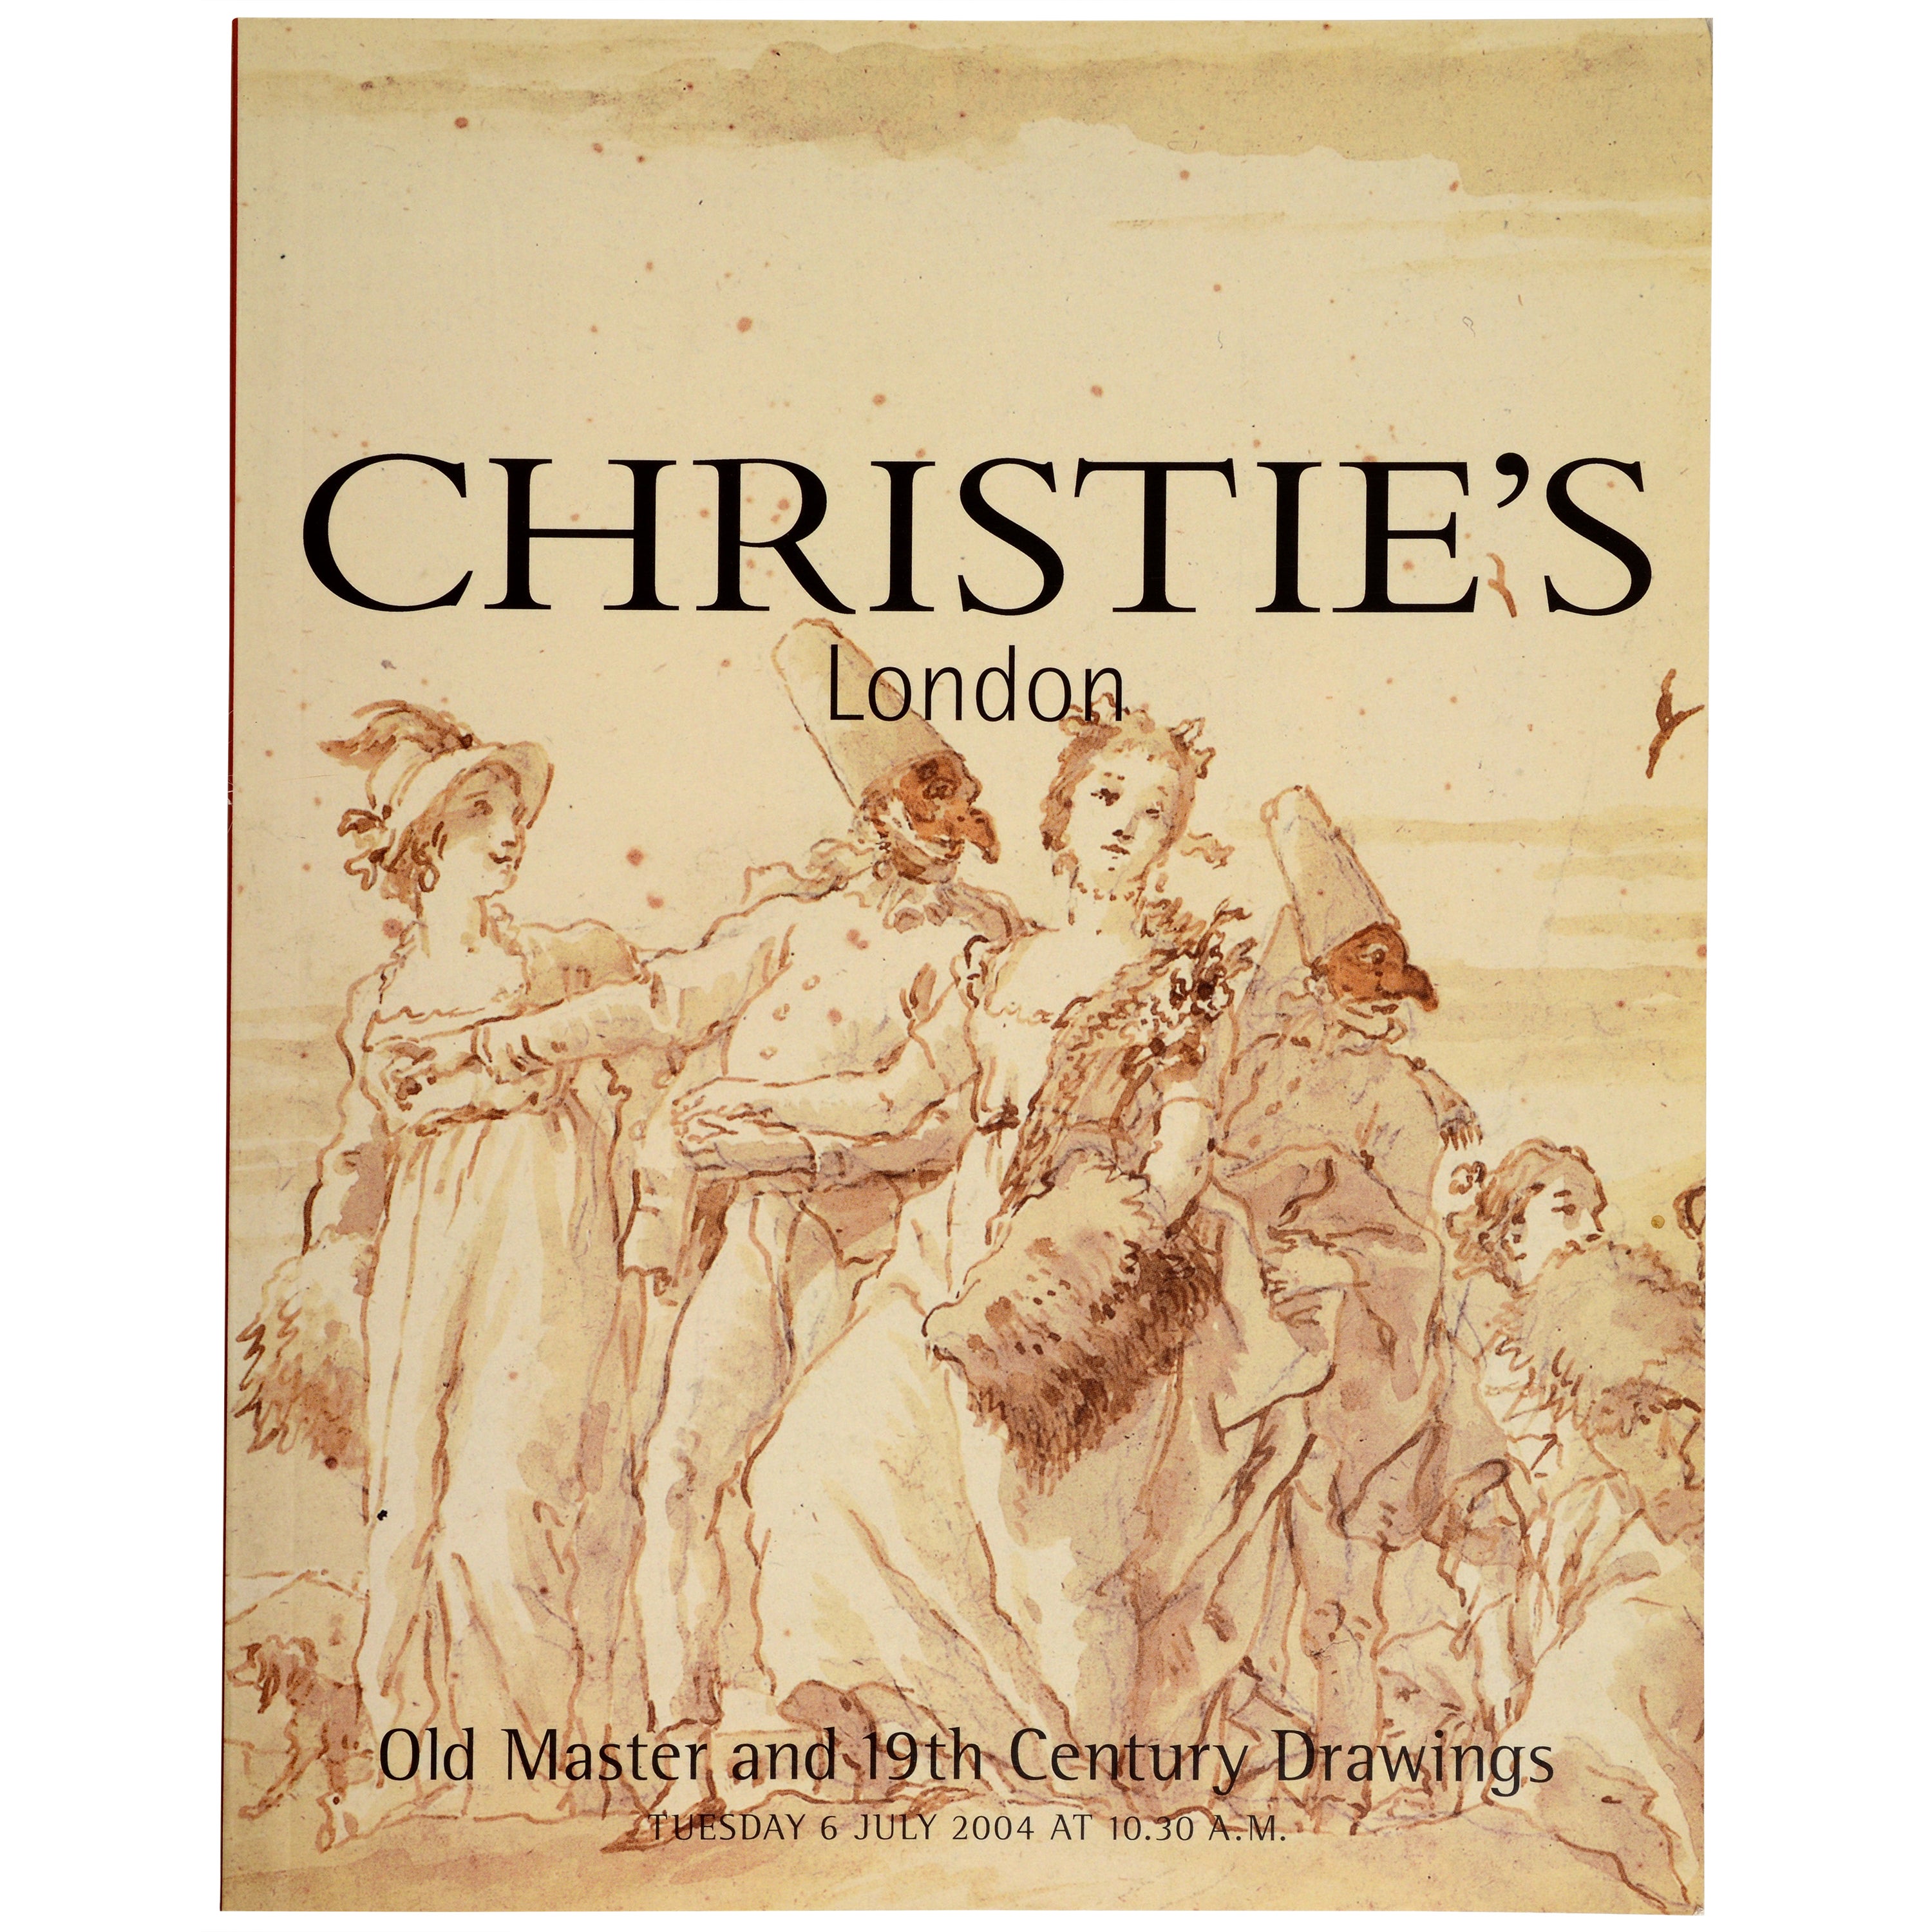 Christieses juillet 2004 - Old Master & 19th Century Drawings, 1st Ed